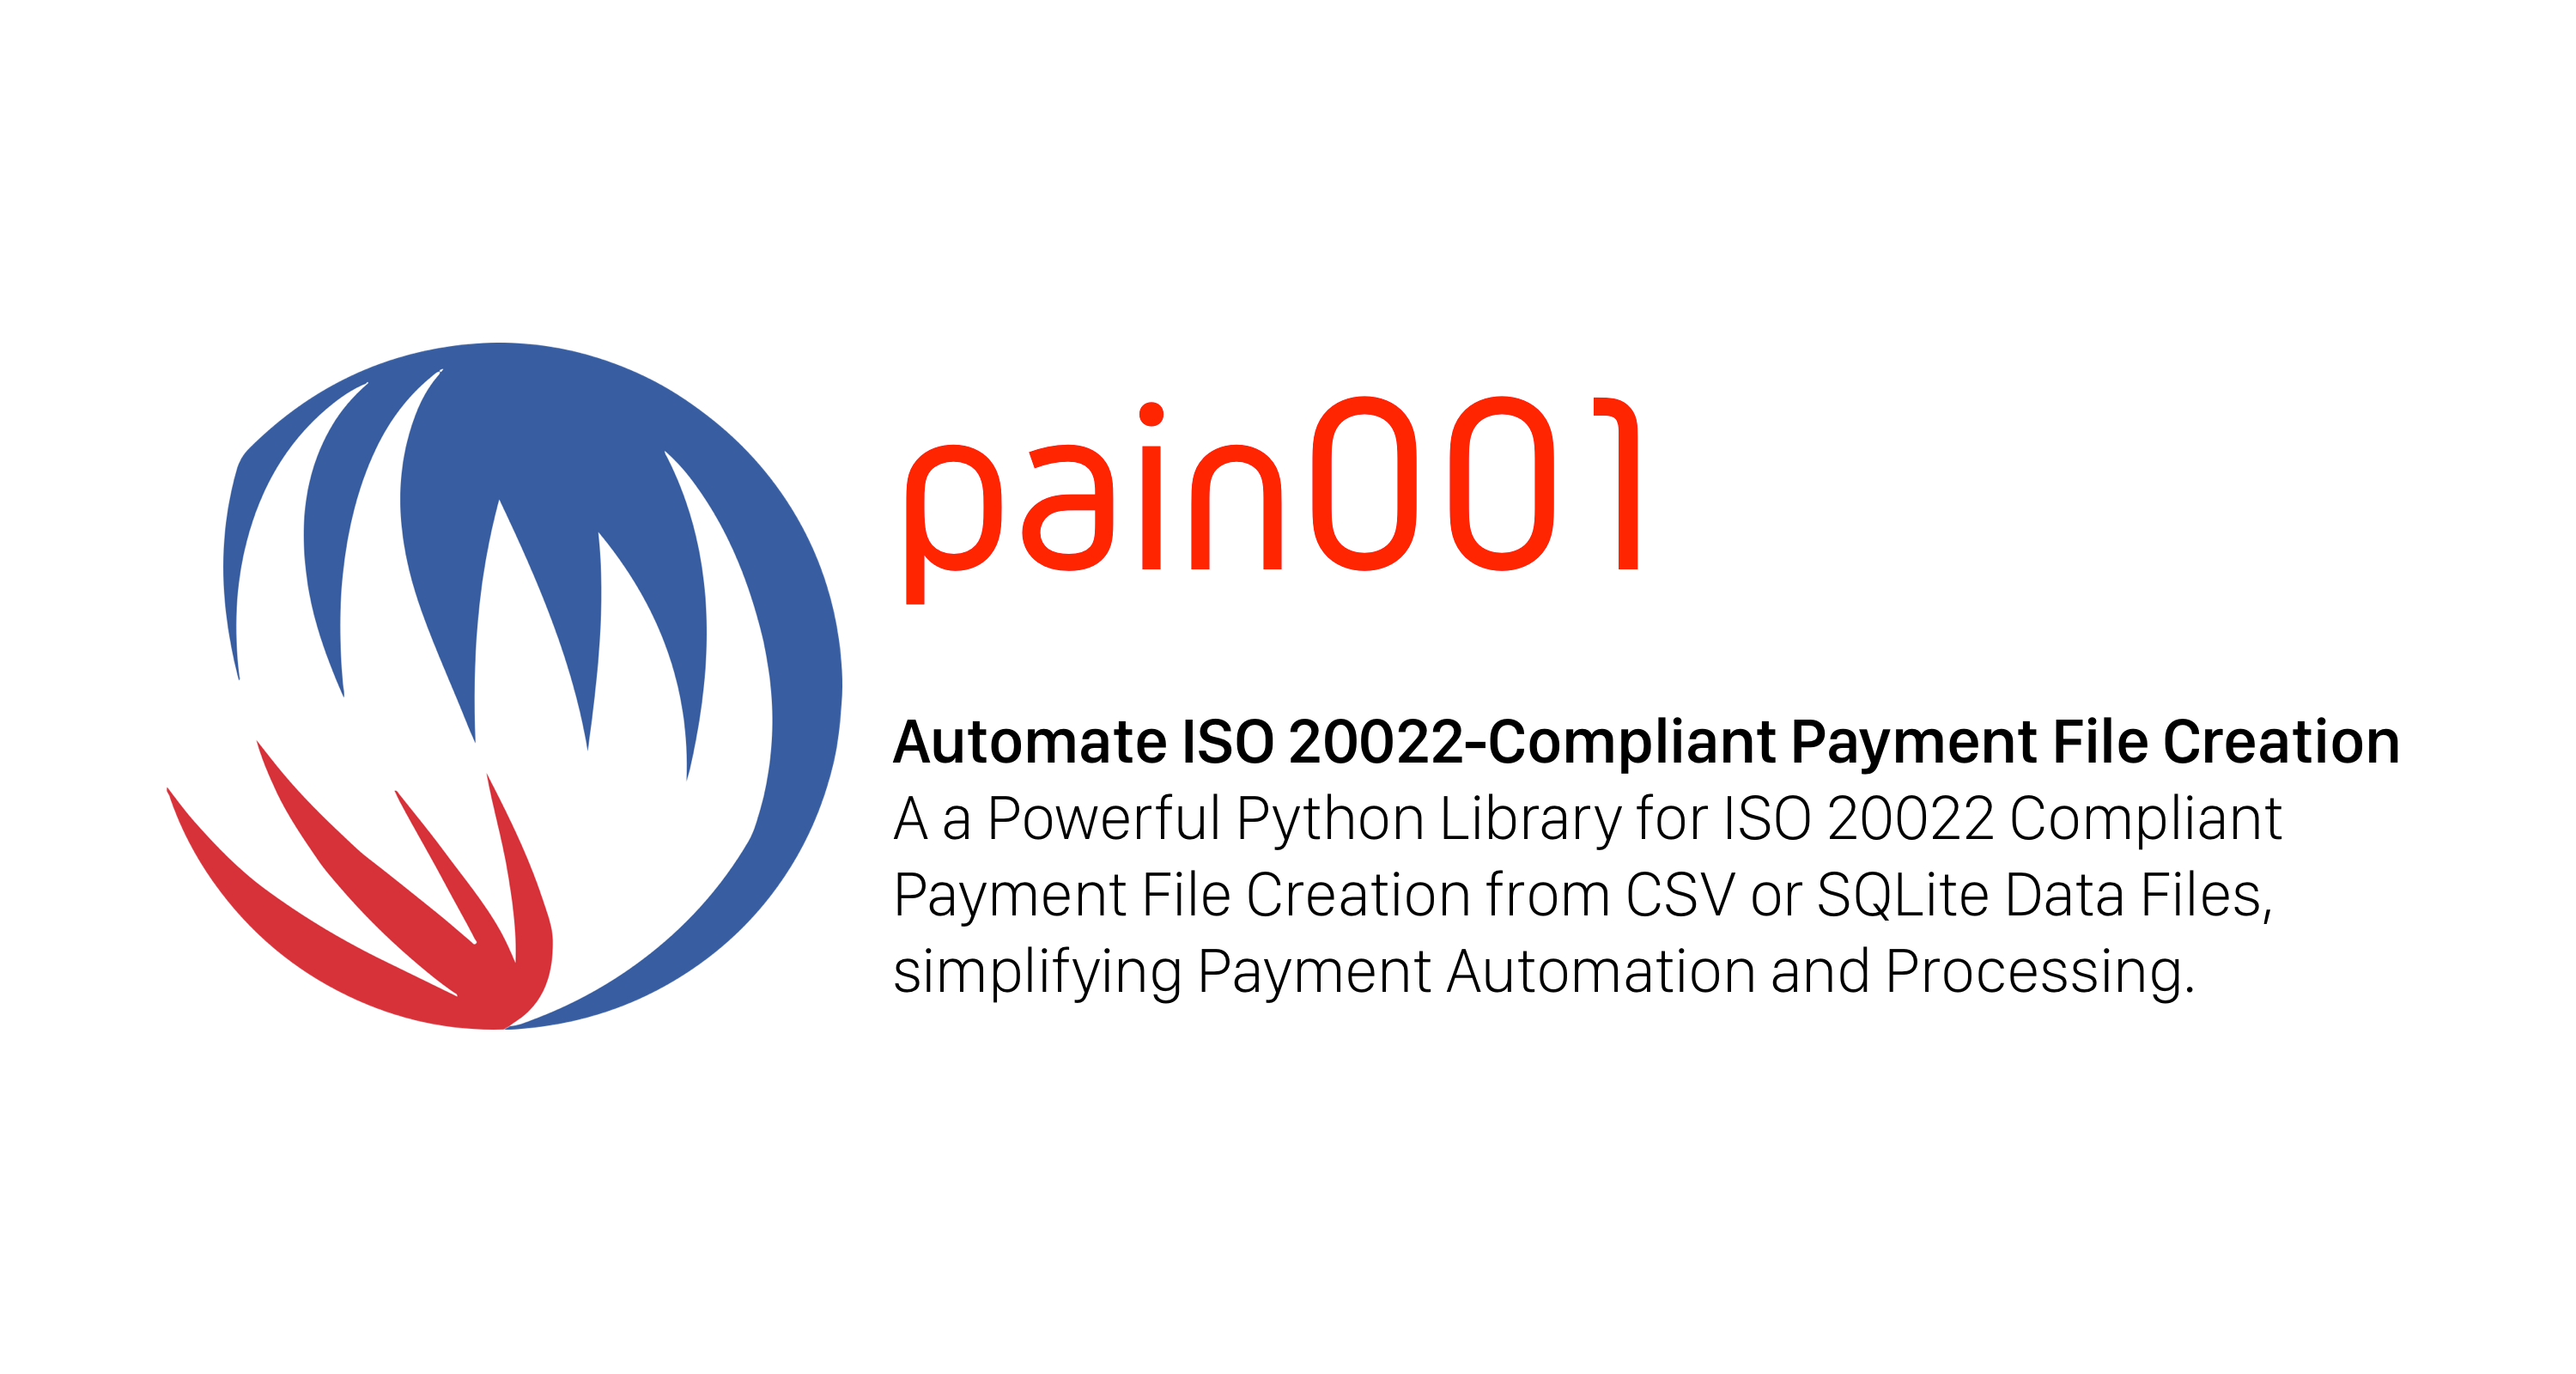 a banner for Pain001